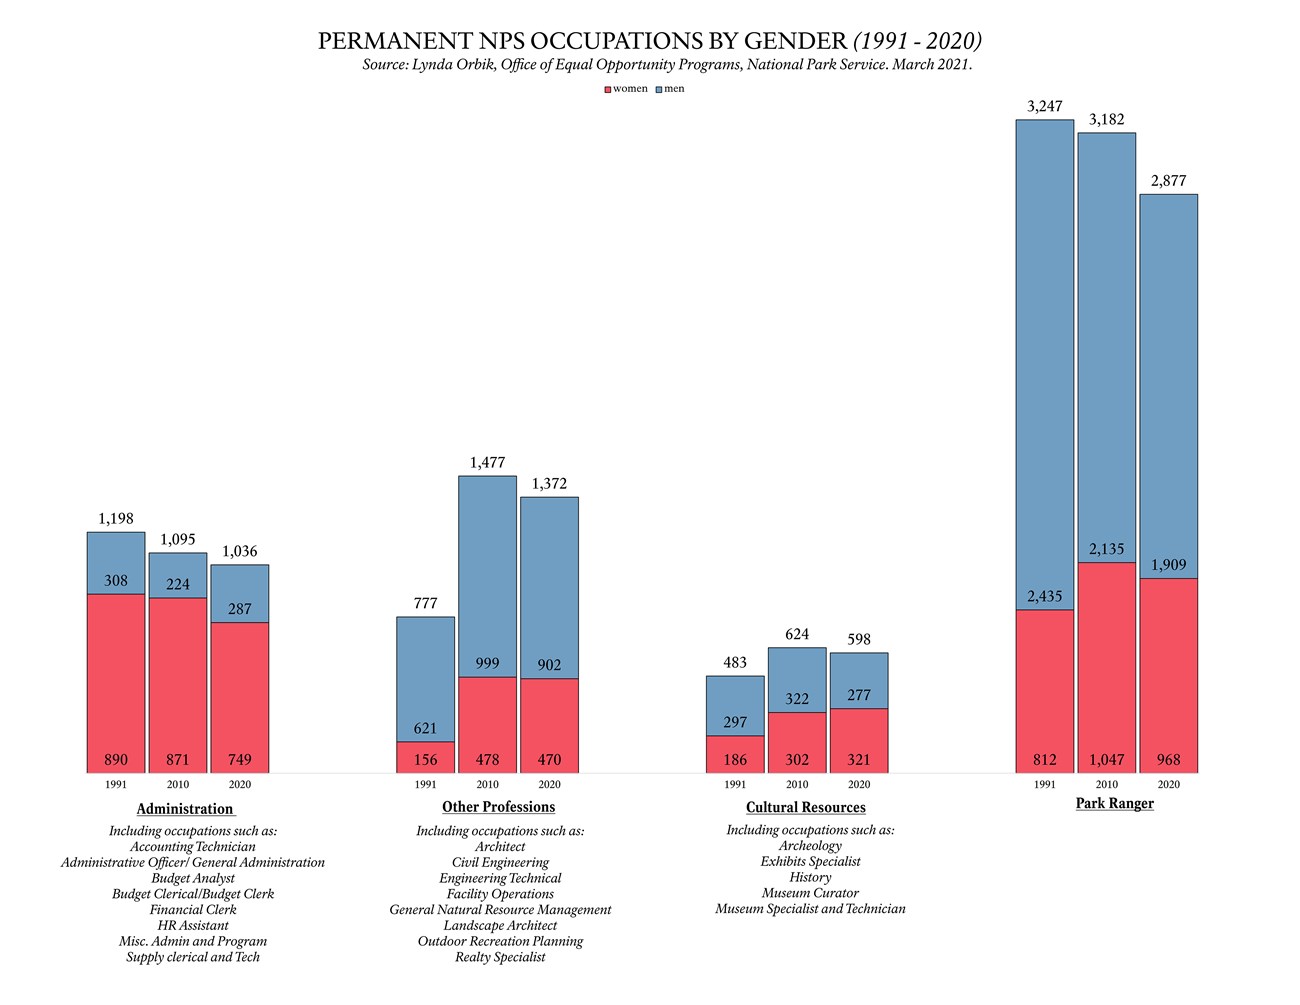 Bar chart representing the NPS employees by gender across different occupational series (1975-2020).